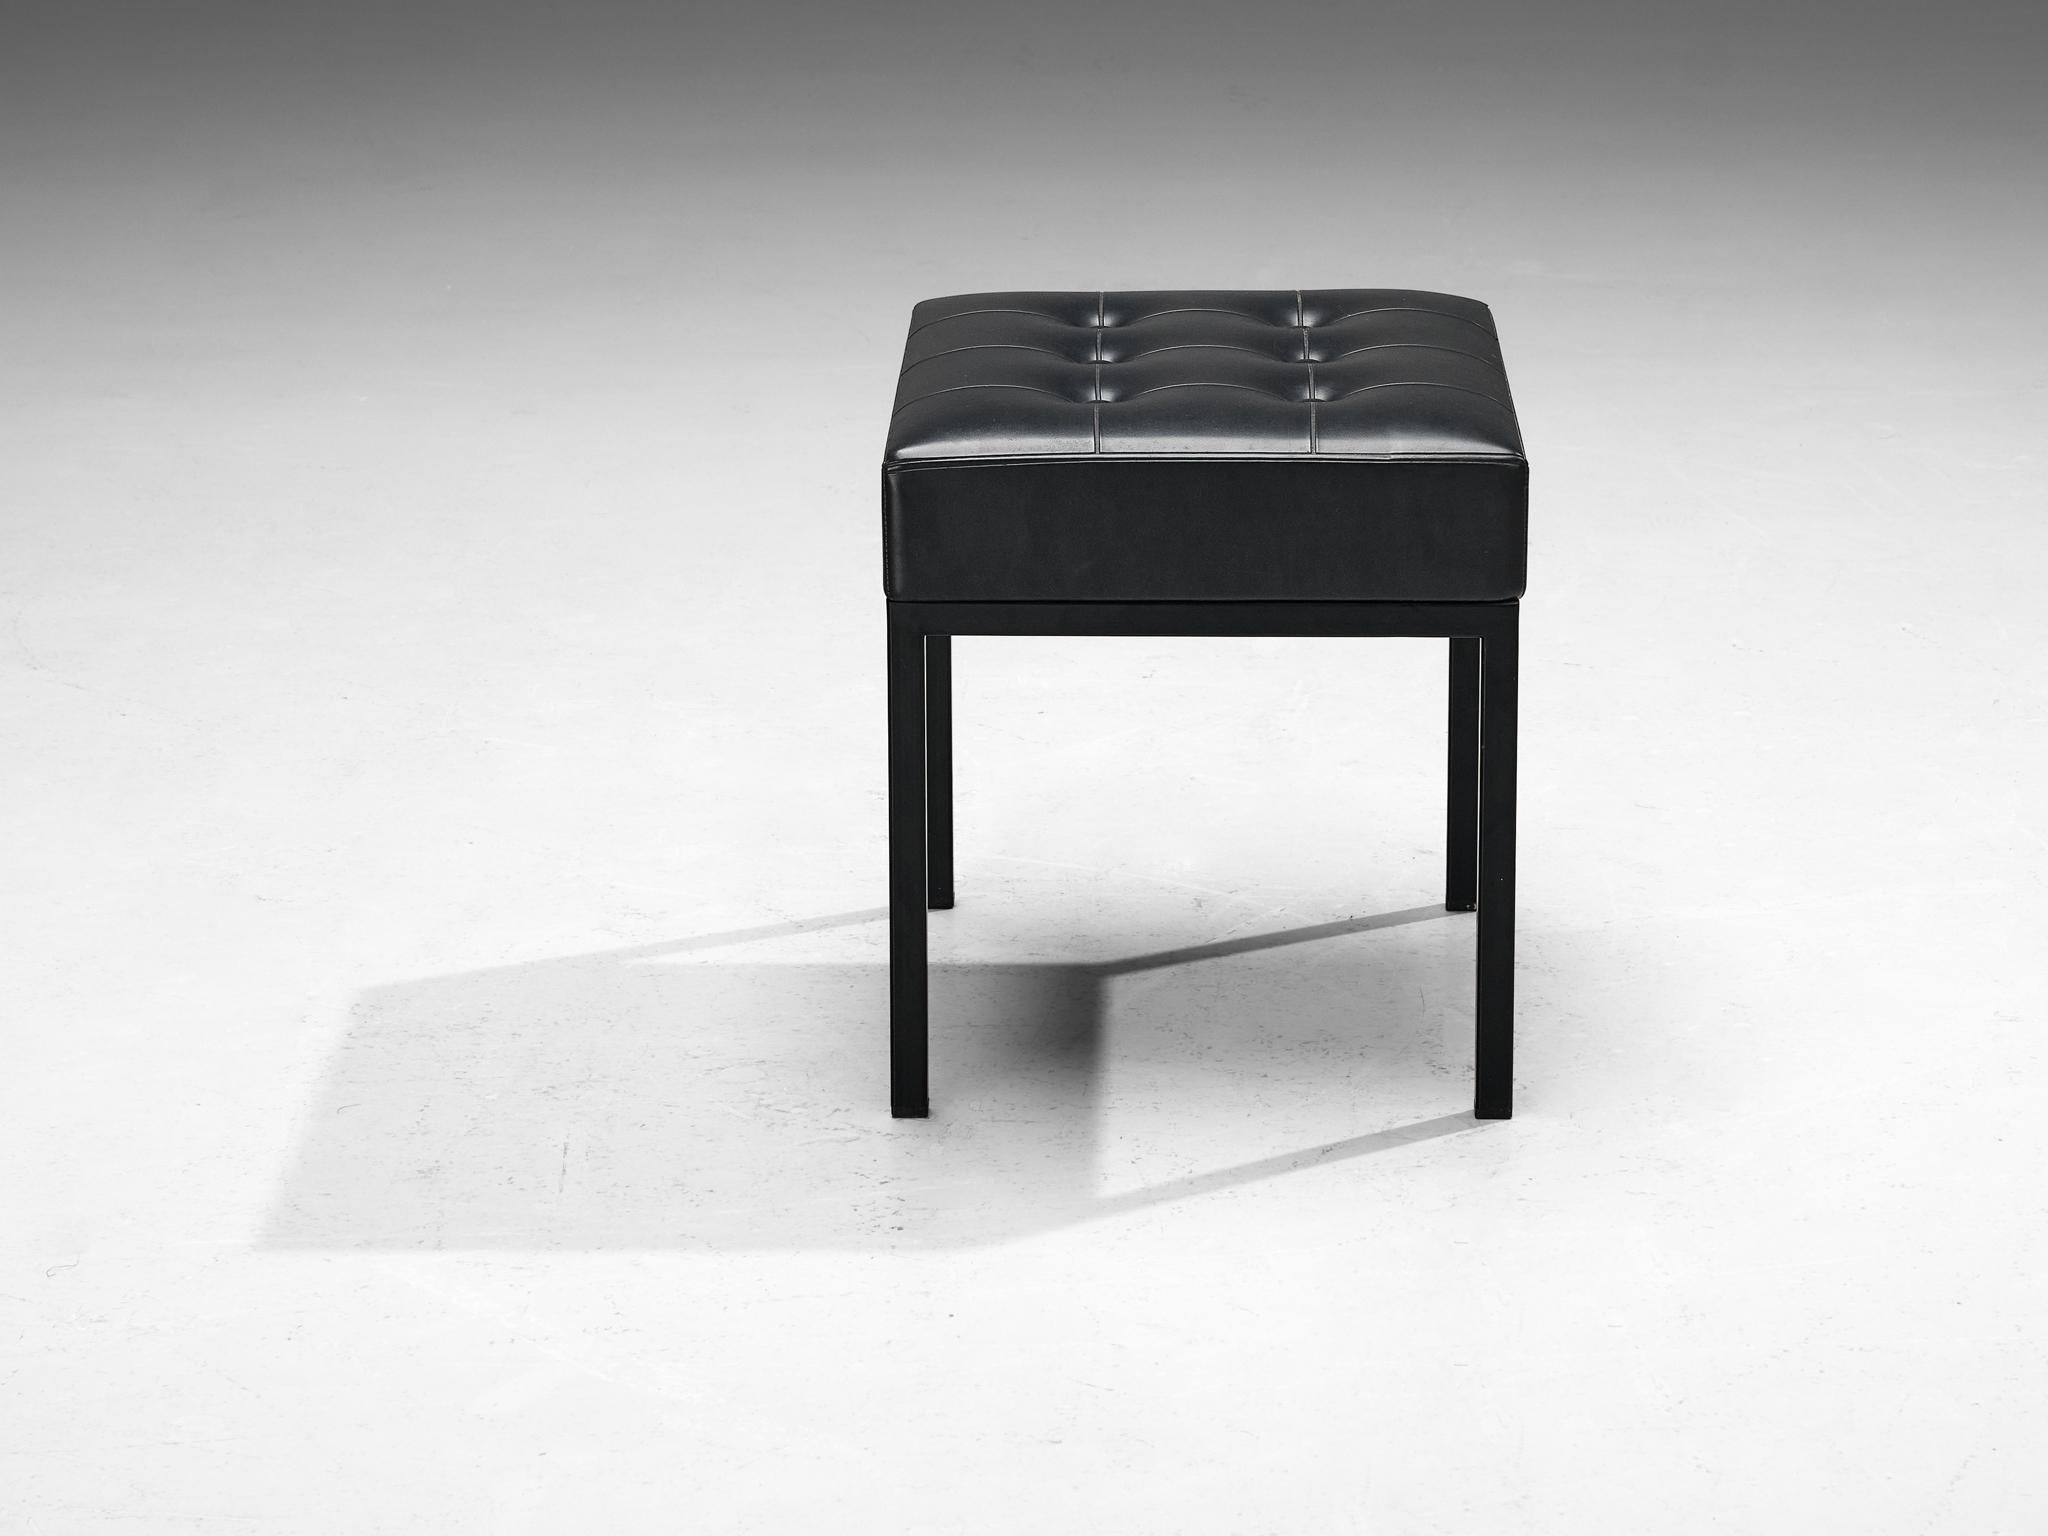 Stools in Metal and Black Upholstery